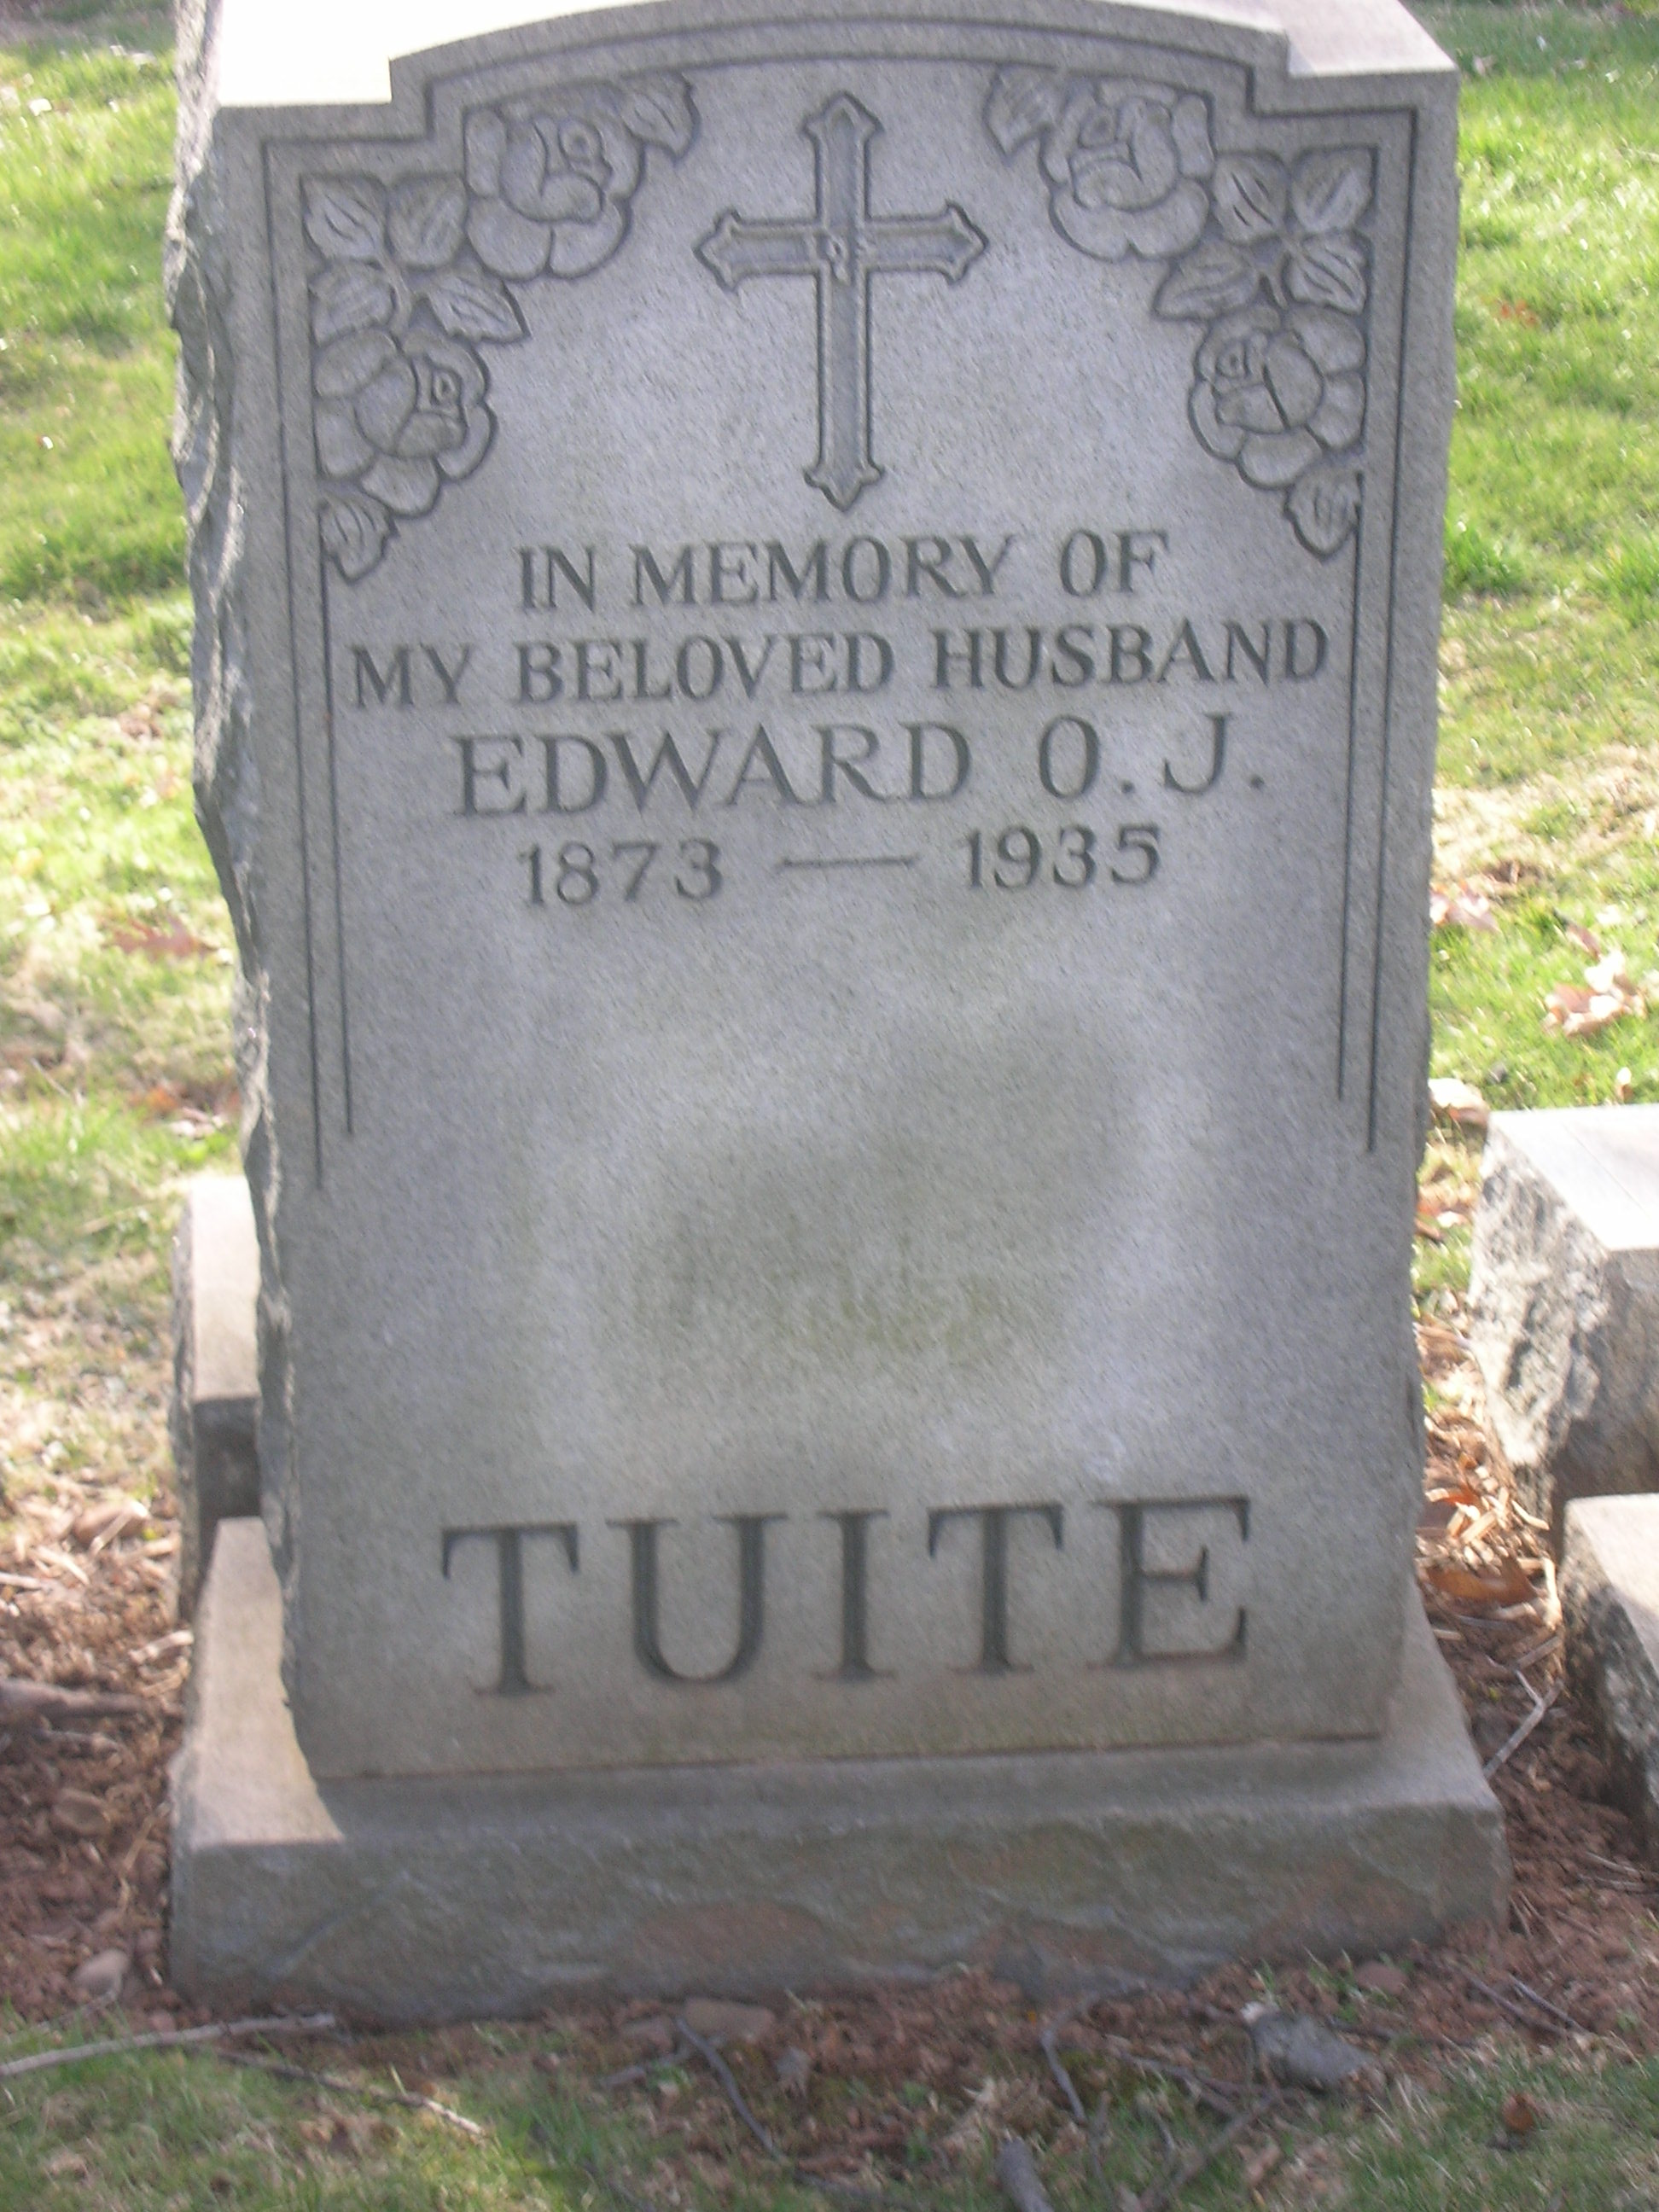 Tuite, Edward D.
Photo from Susan Helber
